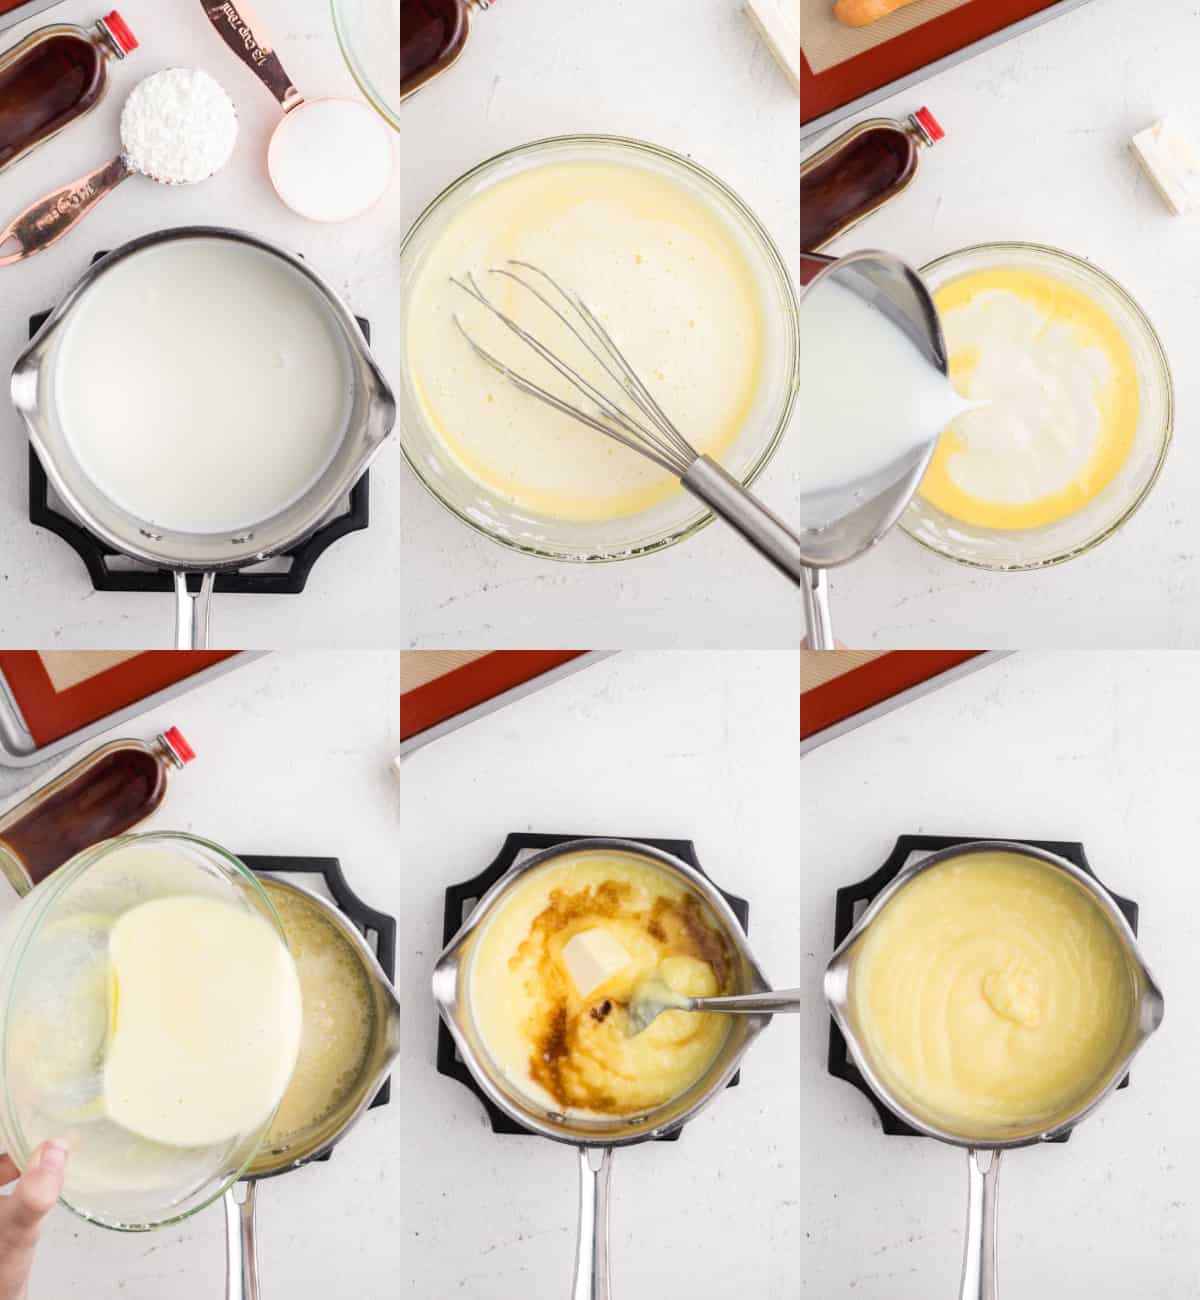 Six images showing the process of making vanilla cream filling for chocolate eclairs.